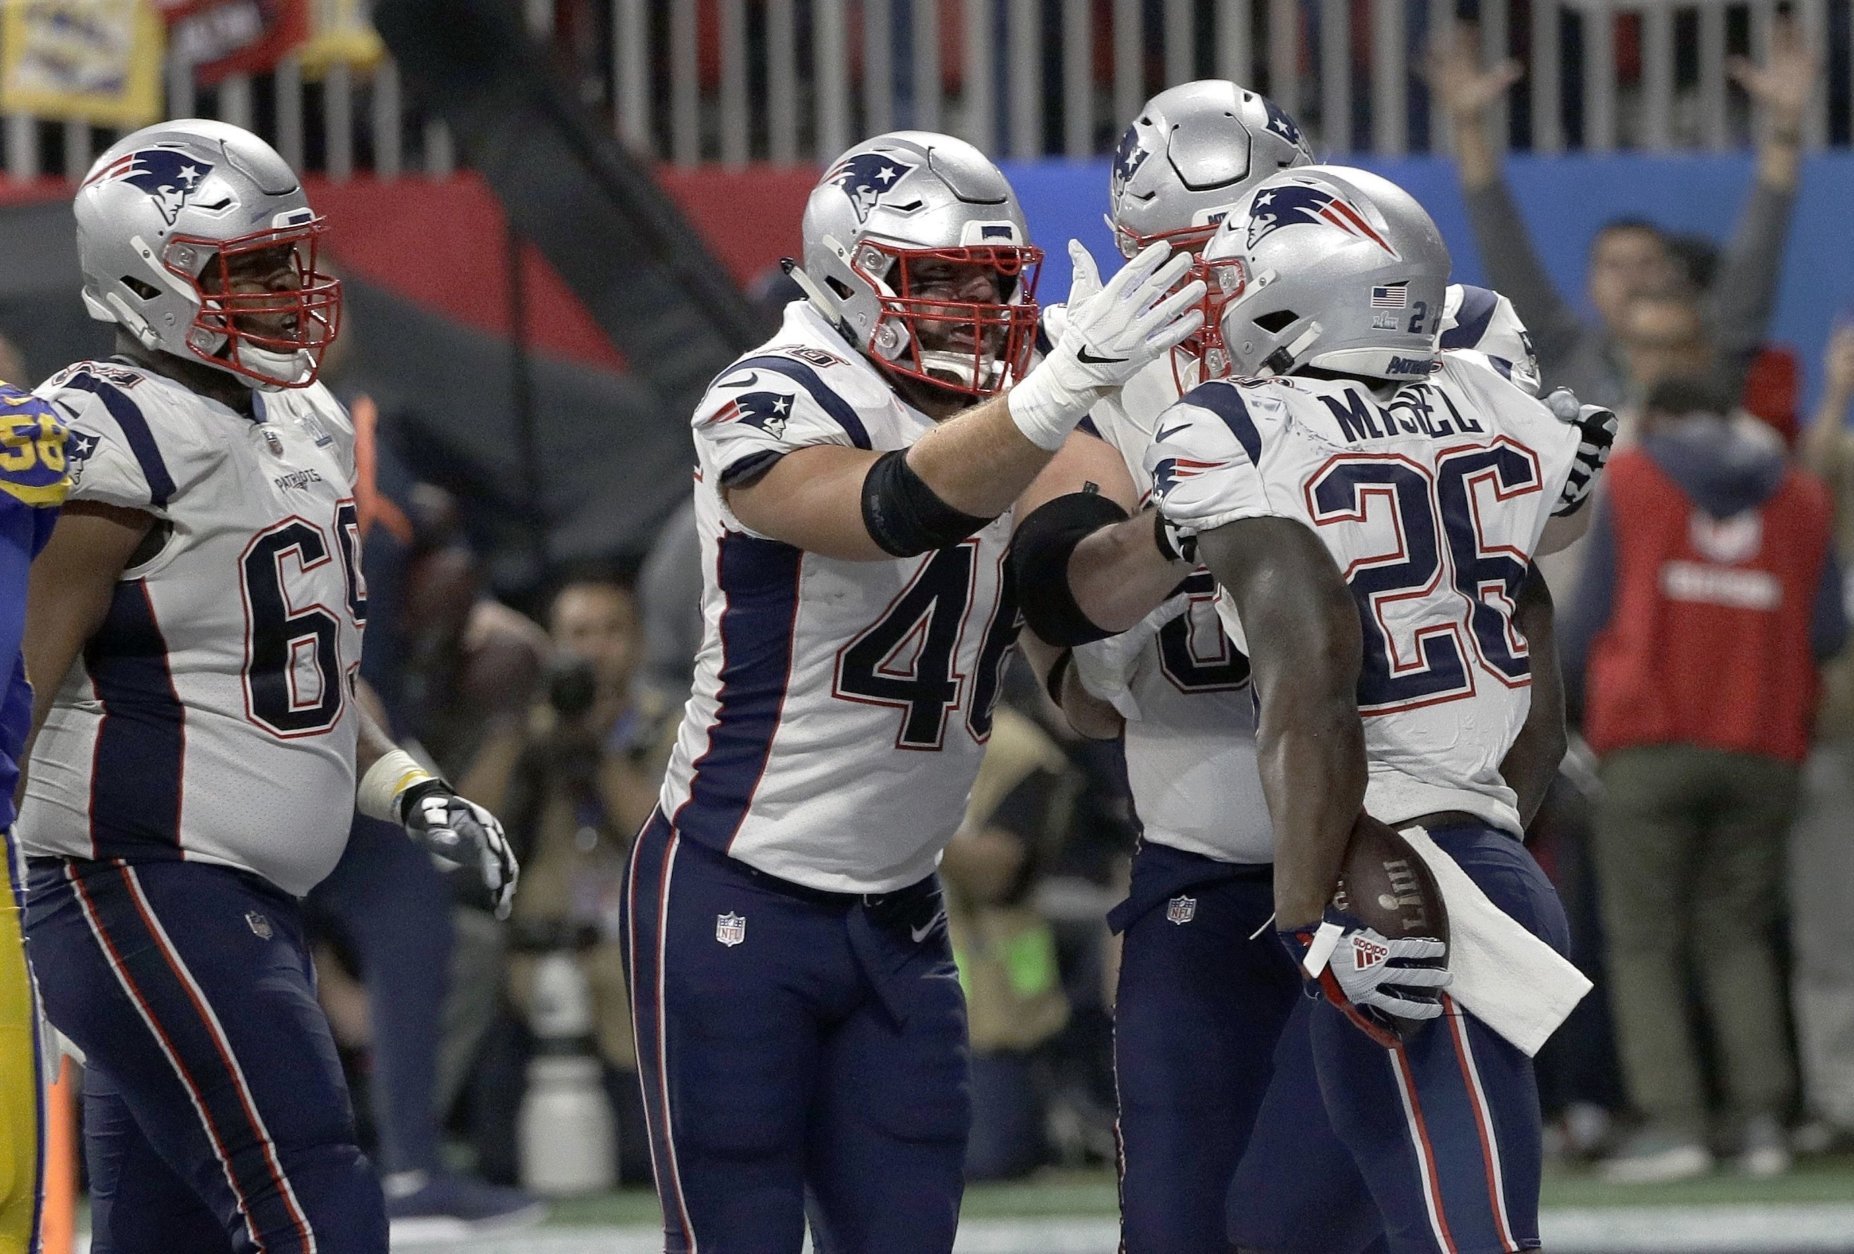 New England Patriots' Sony Michel (26) celebrates his touchdown with James Develin, center, during the second half of the NFL Super Bowl 53 football game against the Los Angeles Rams, Sunday, Feb. 3, 2019, in Atlanta. (AP Photo/David J. Phillip)